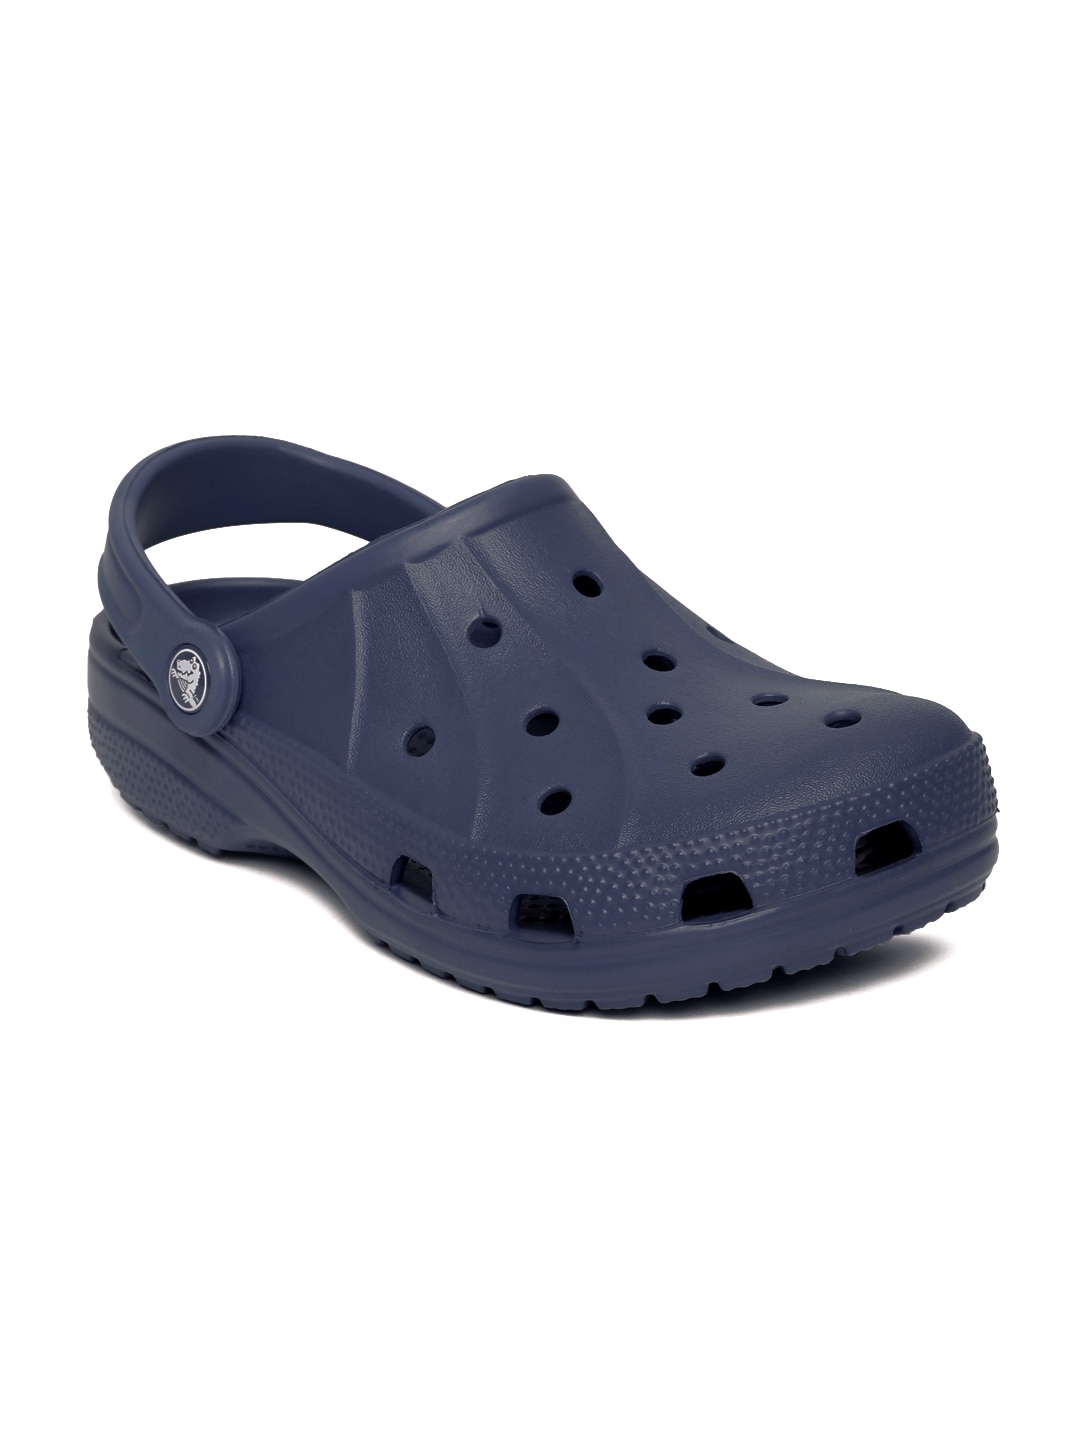 Crocs Ralen Unisex Navy Clogs Price in India, Full Specifications  Offers 